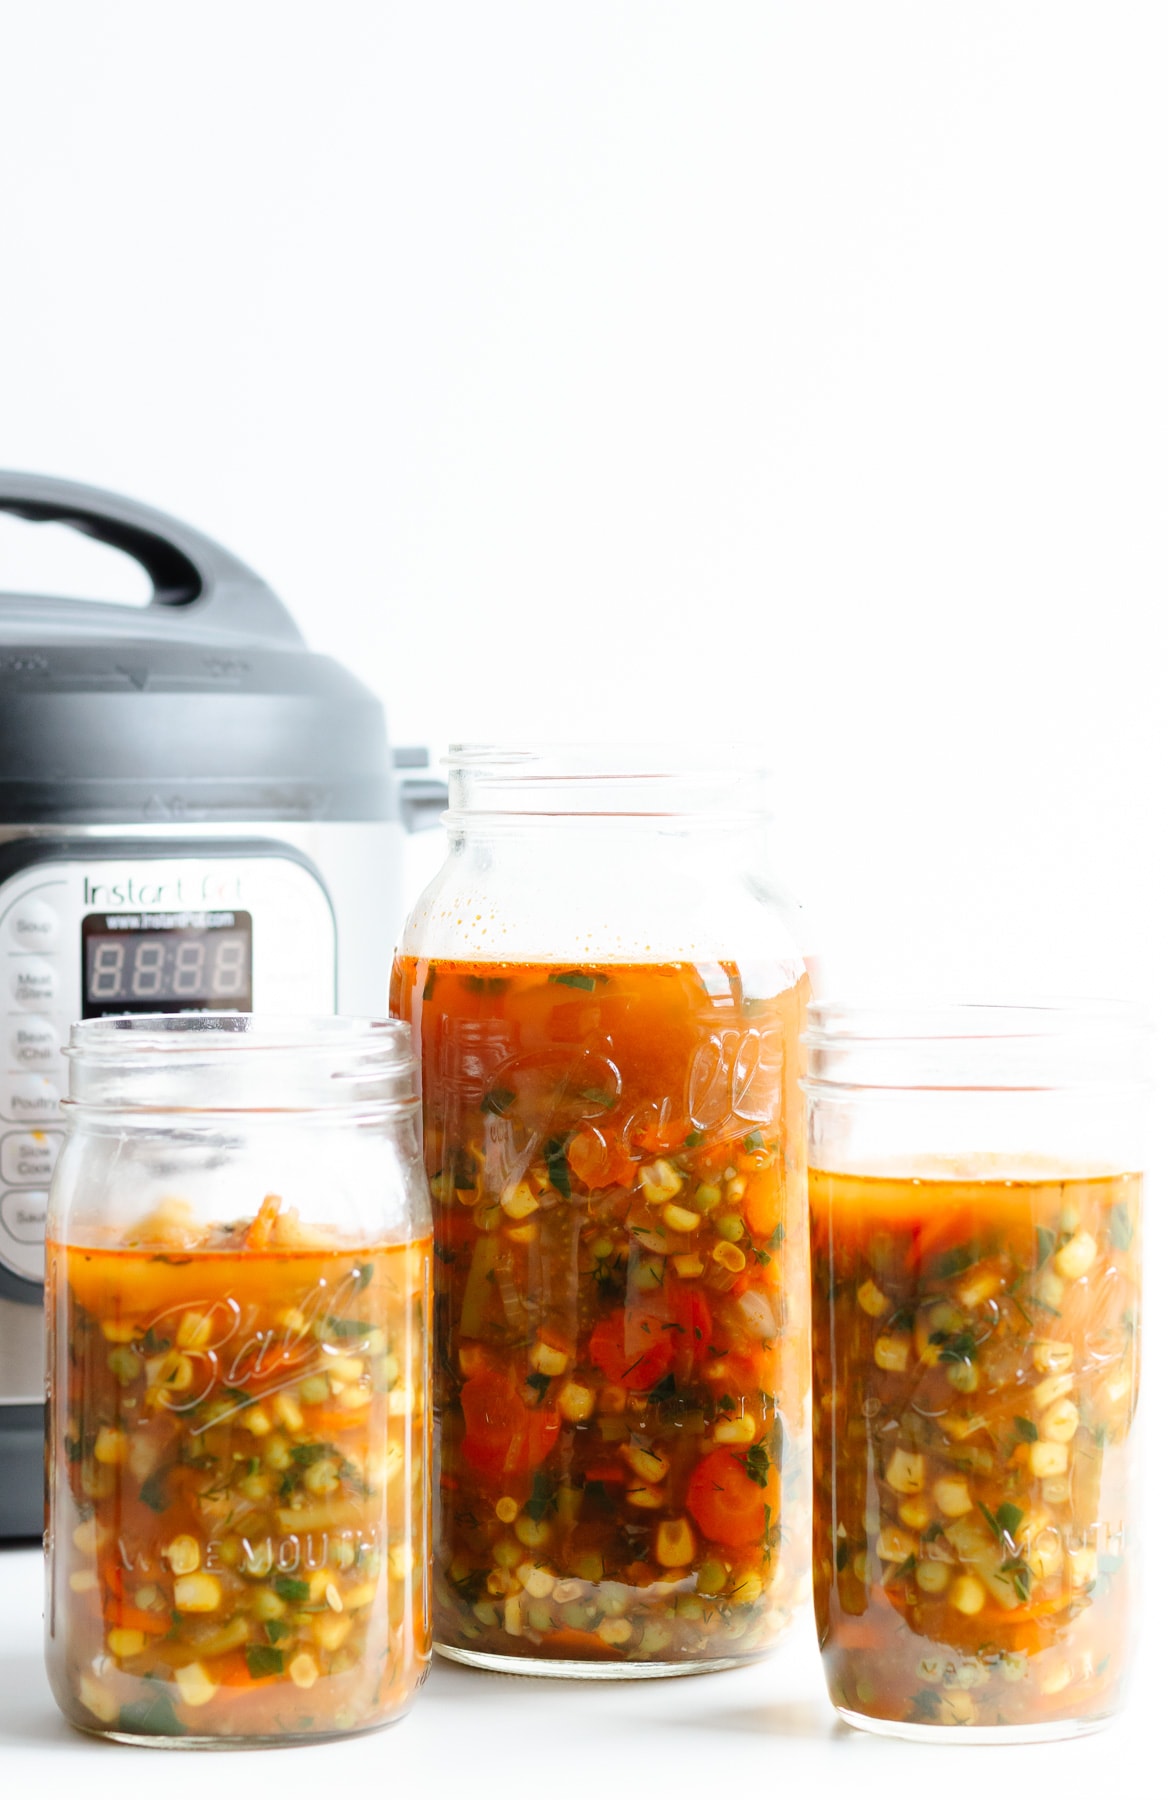 Three jars of vegetable soup standing in front of an Instant Pot.